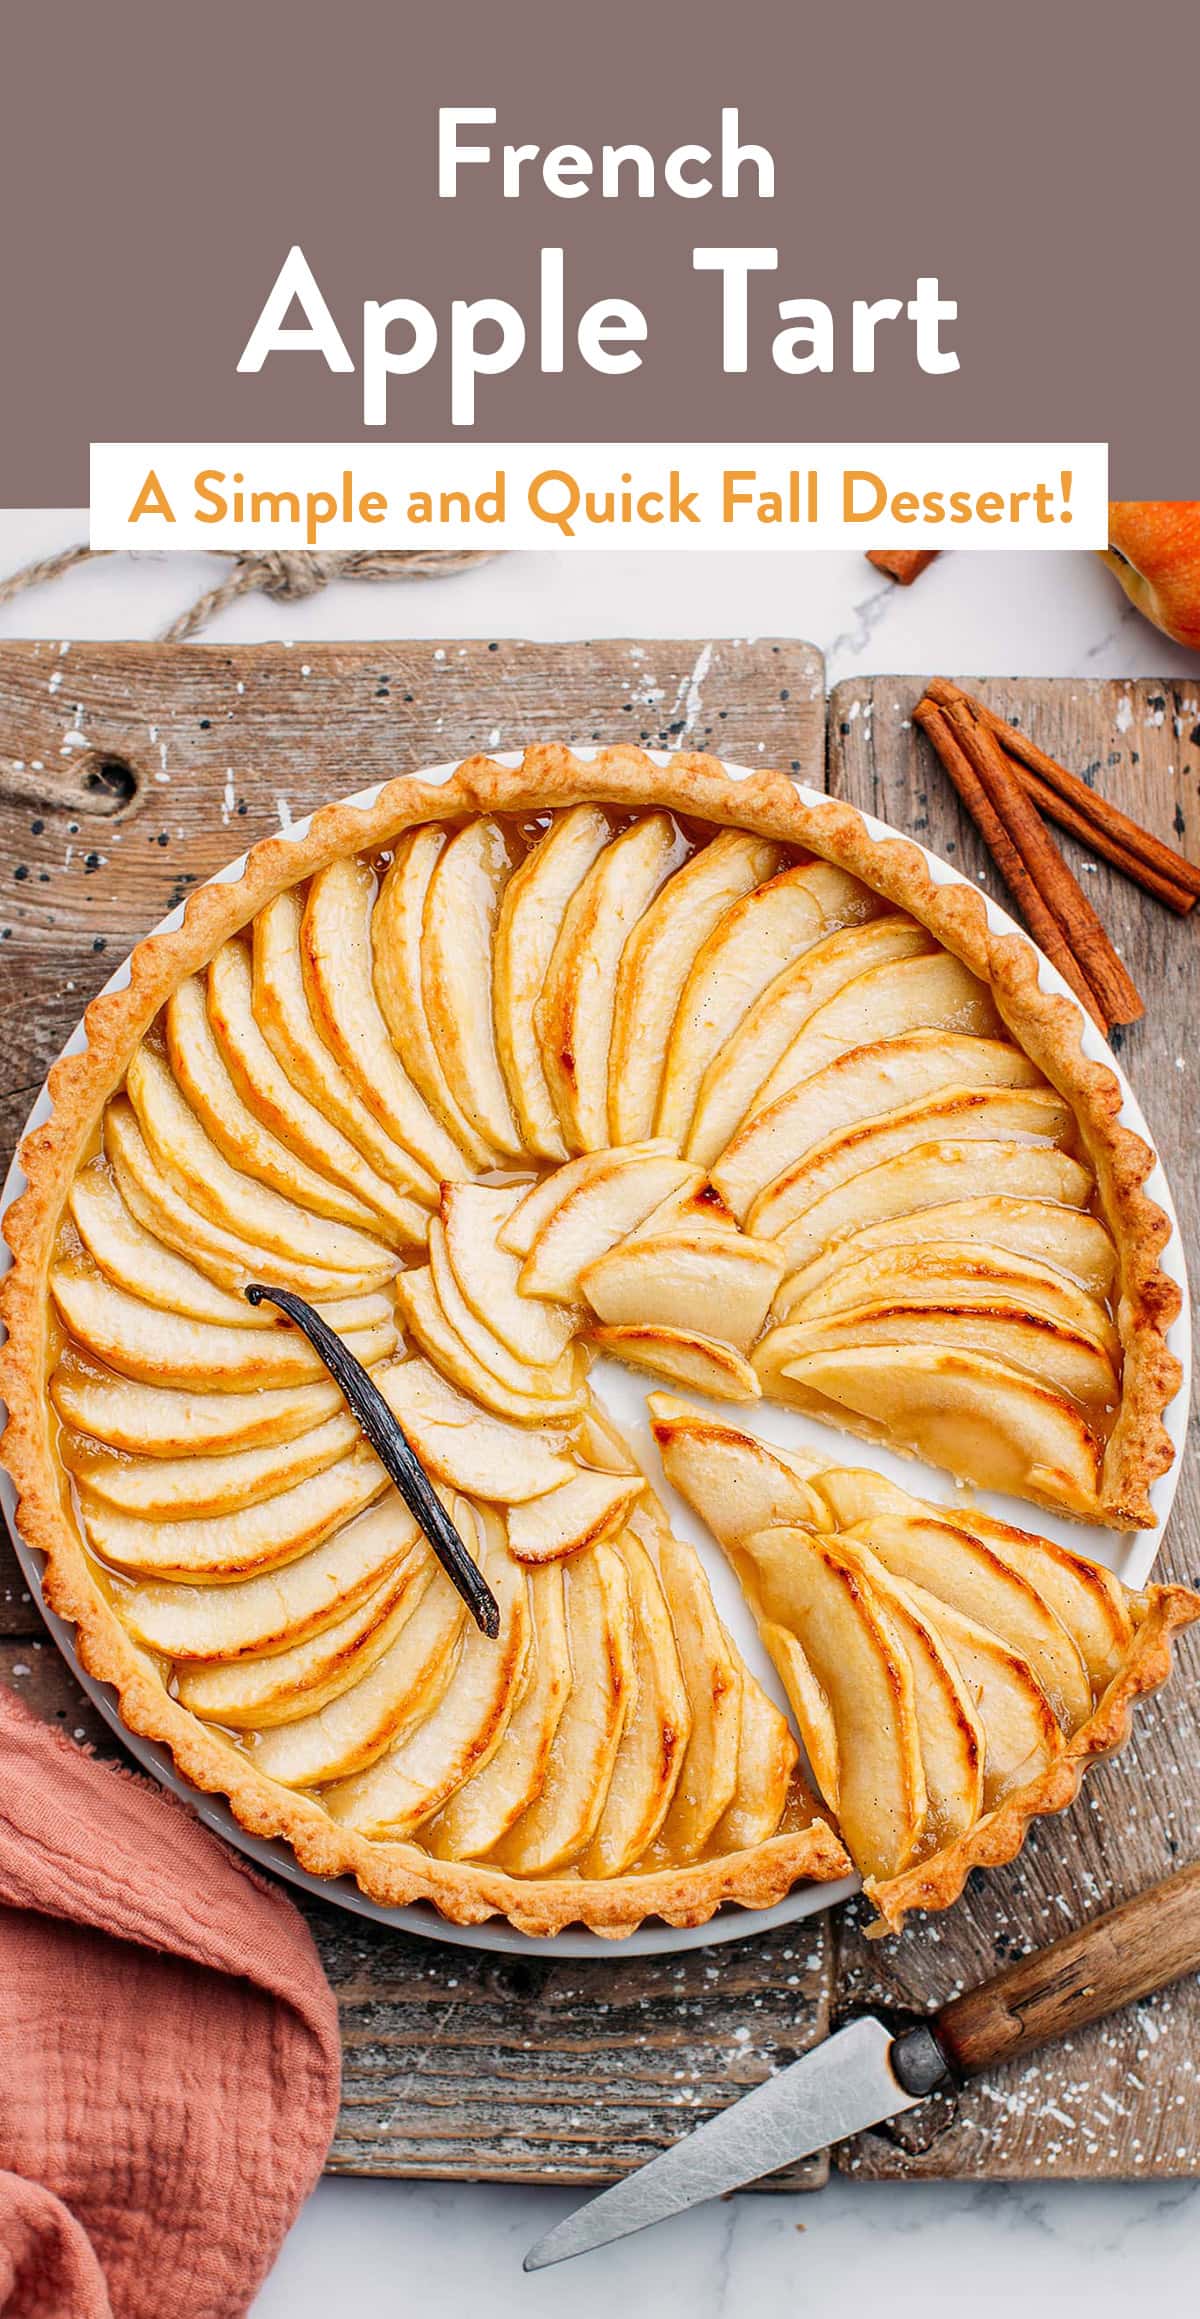 This rustic French apple tart features thinly sliced apples layered over a generous bed of apple sauce, all baked in a flaky pie crust. It's a simple and affordable Fall dessert that will surely be a hit with the entire family! #appletart #fall #vegan